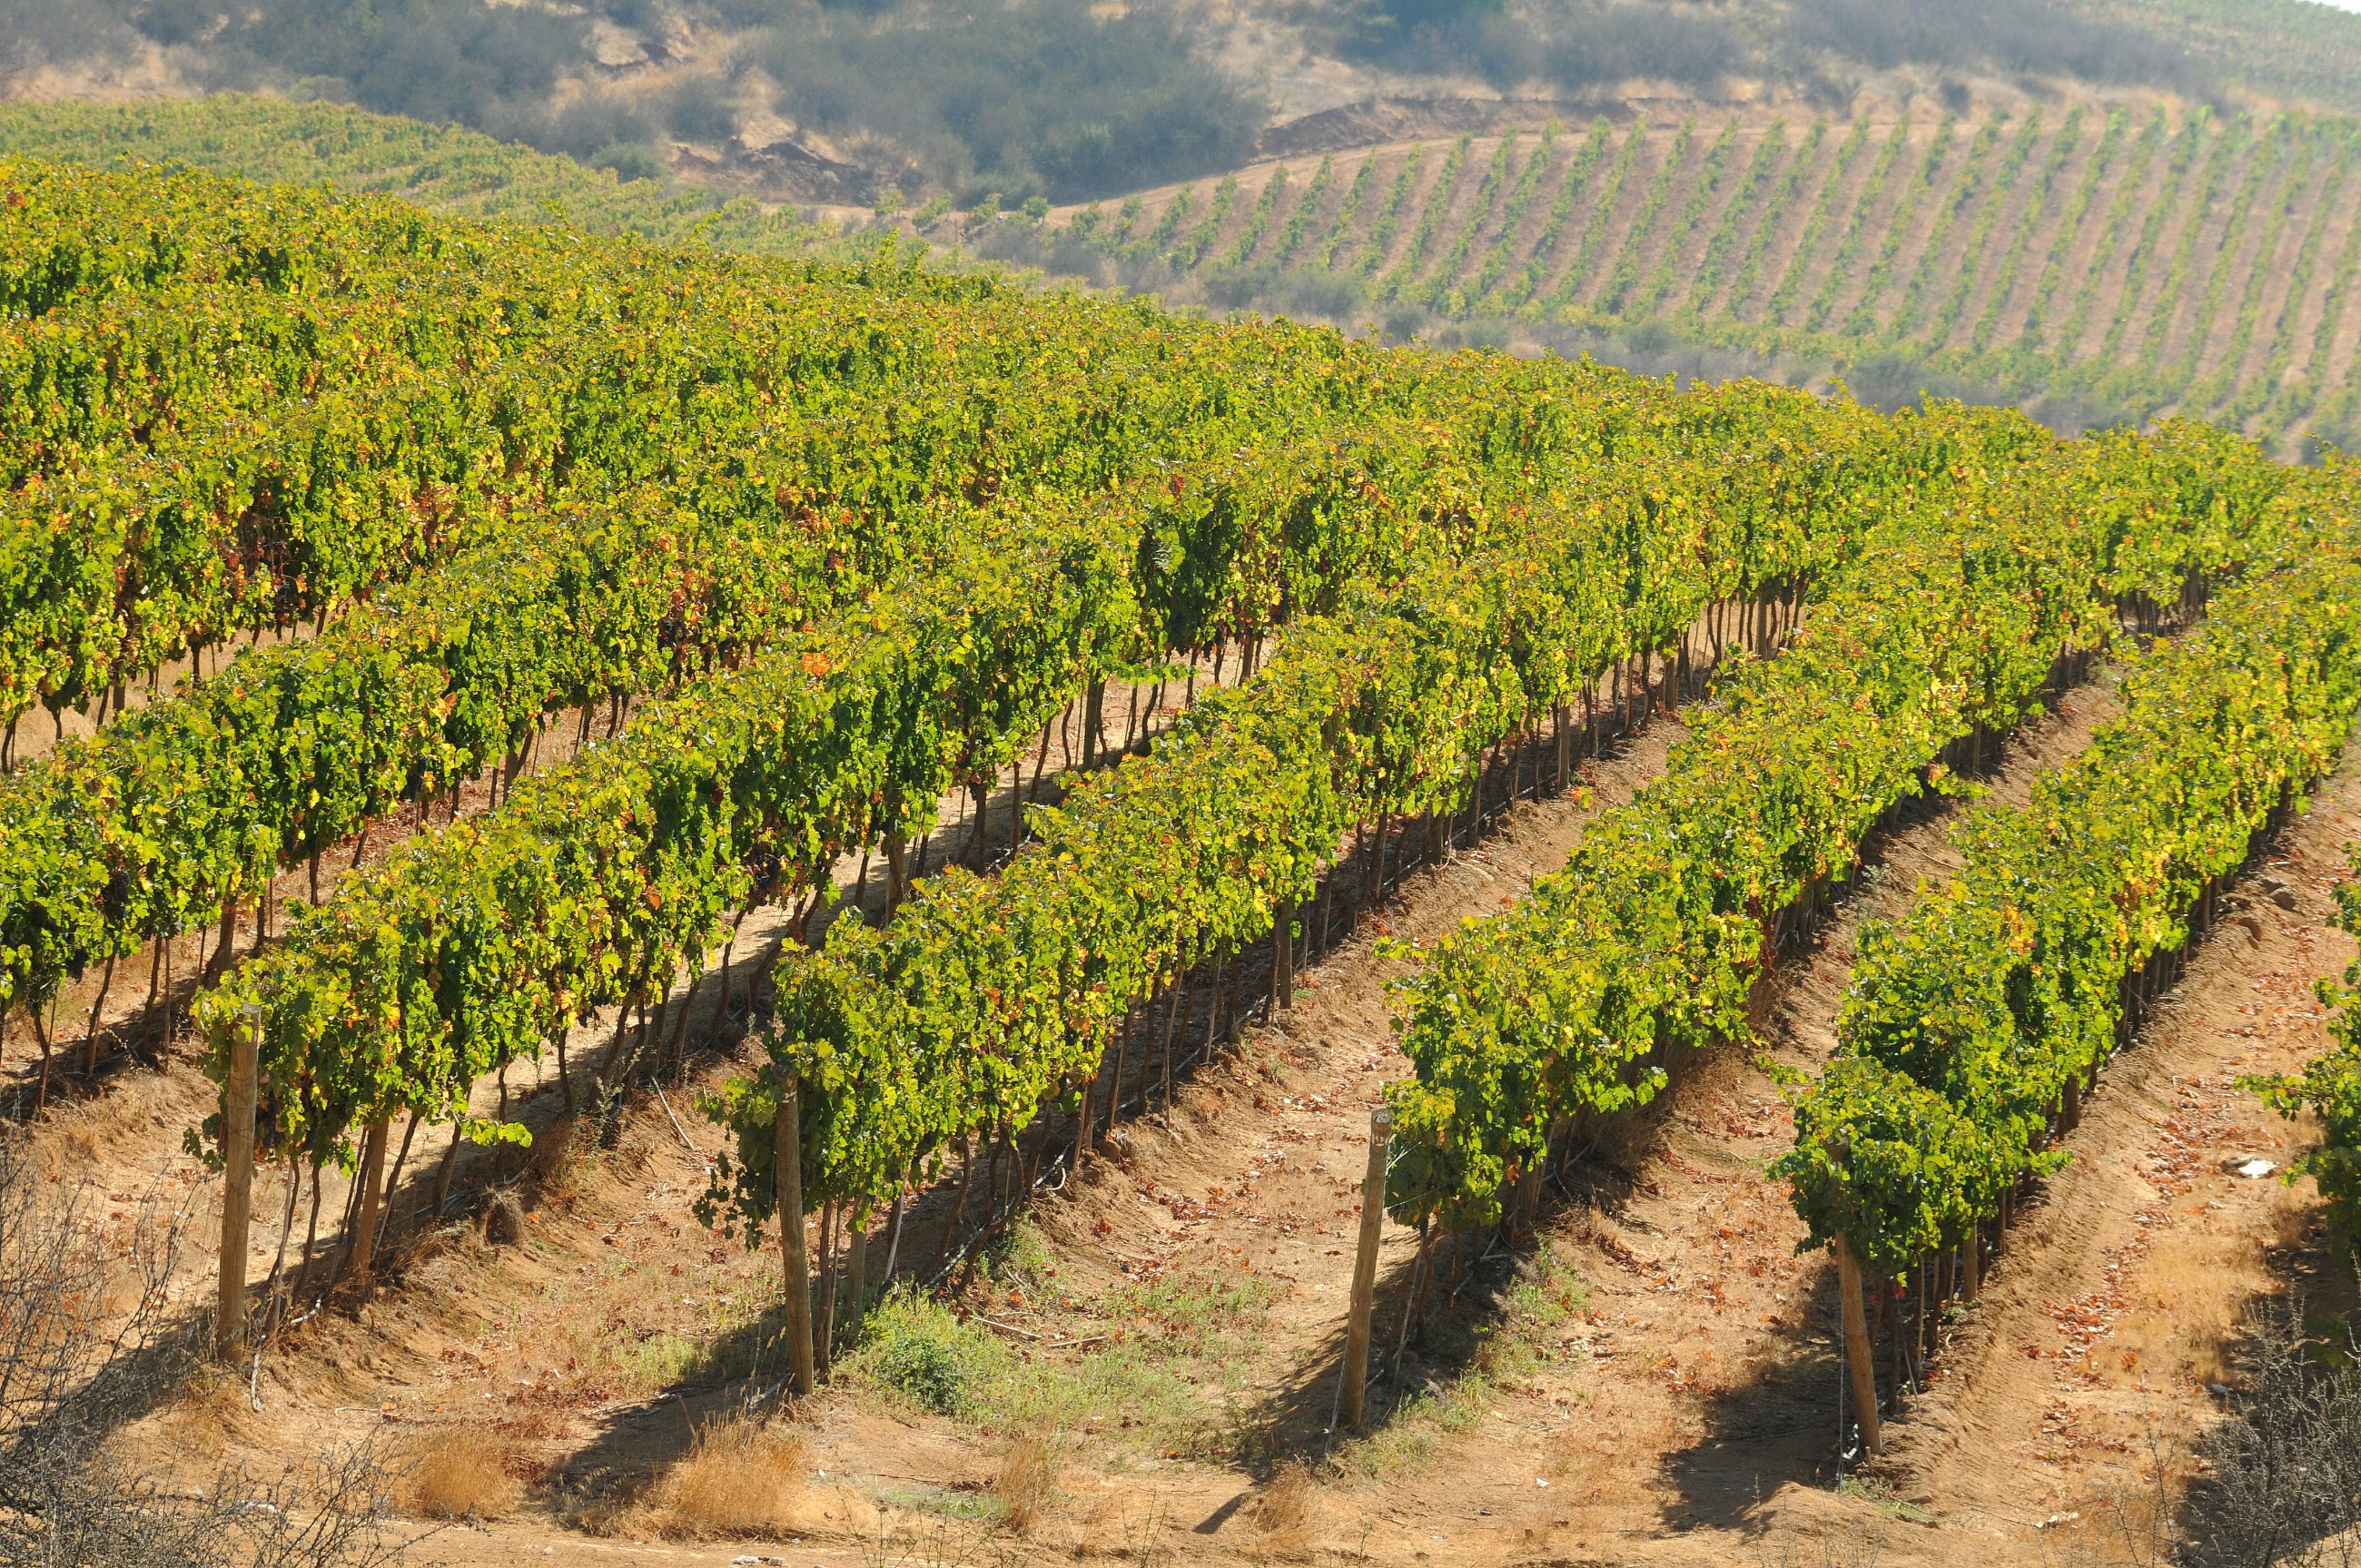 Palo Santo Vineyard, among Gran Reserva's estate sites and home to its Cabernet Sauvignon and Malbec, encompasses 768 acres planted to diverse varieties, with both mountain and river terrace influences thanks to colluvial soils.